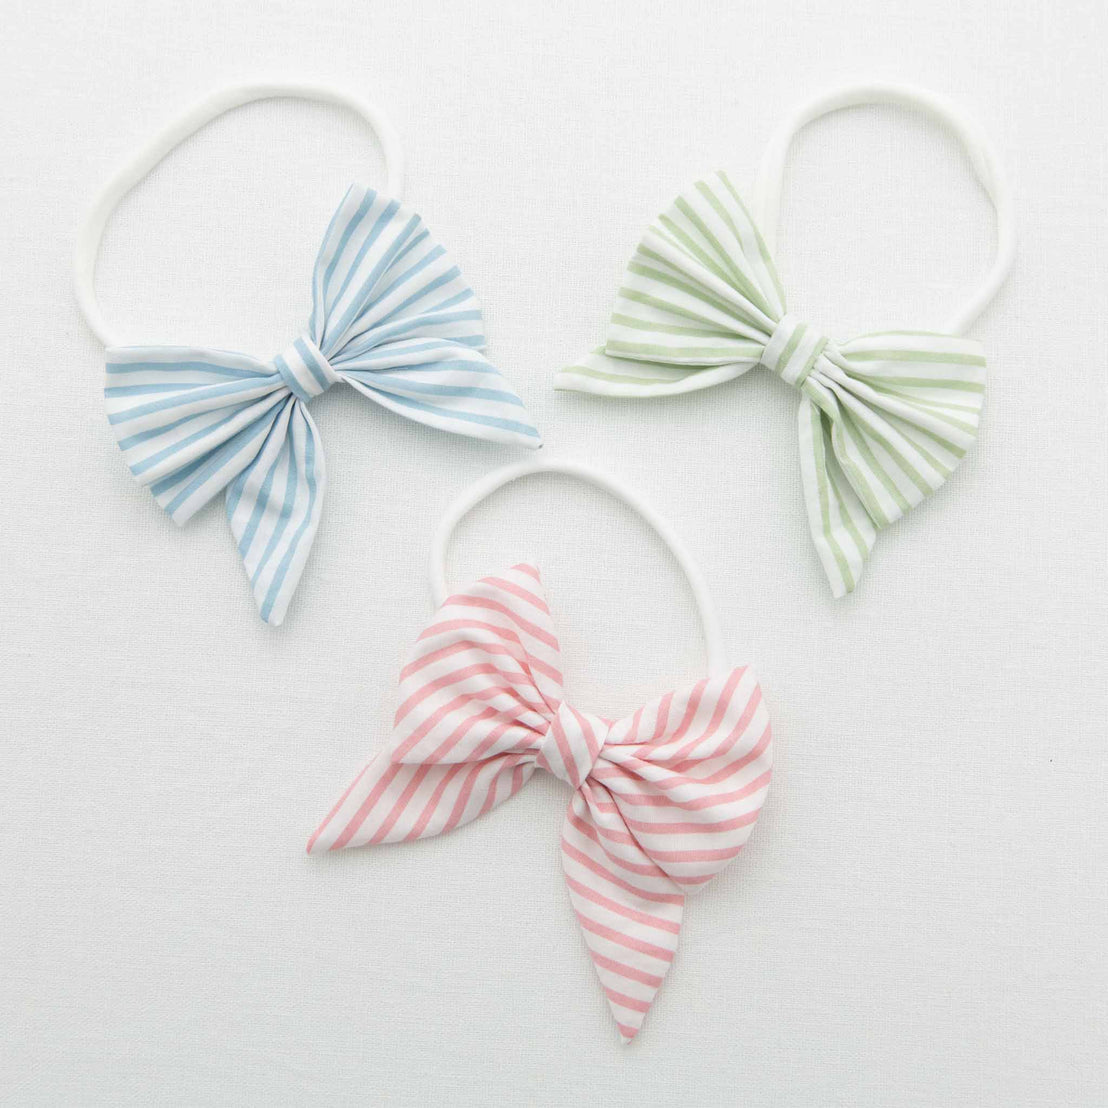 The three shades of the Thea bow headbands in blue, green, and pink on a white background.